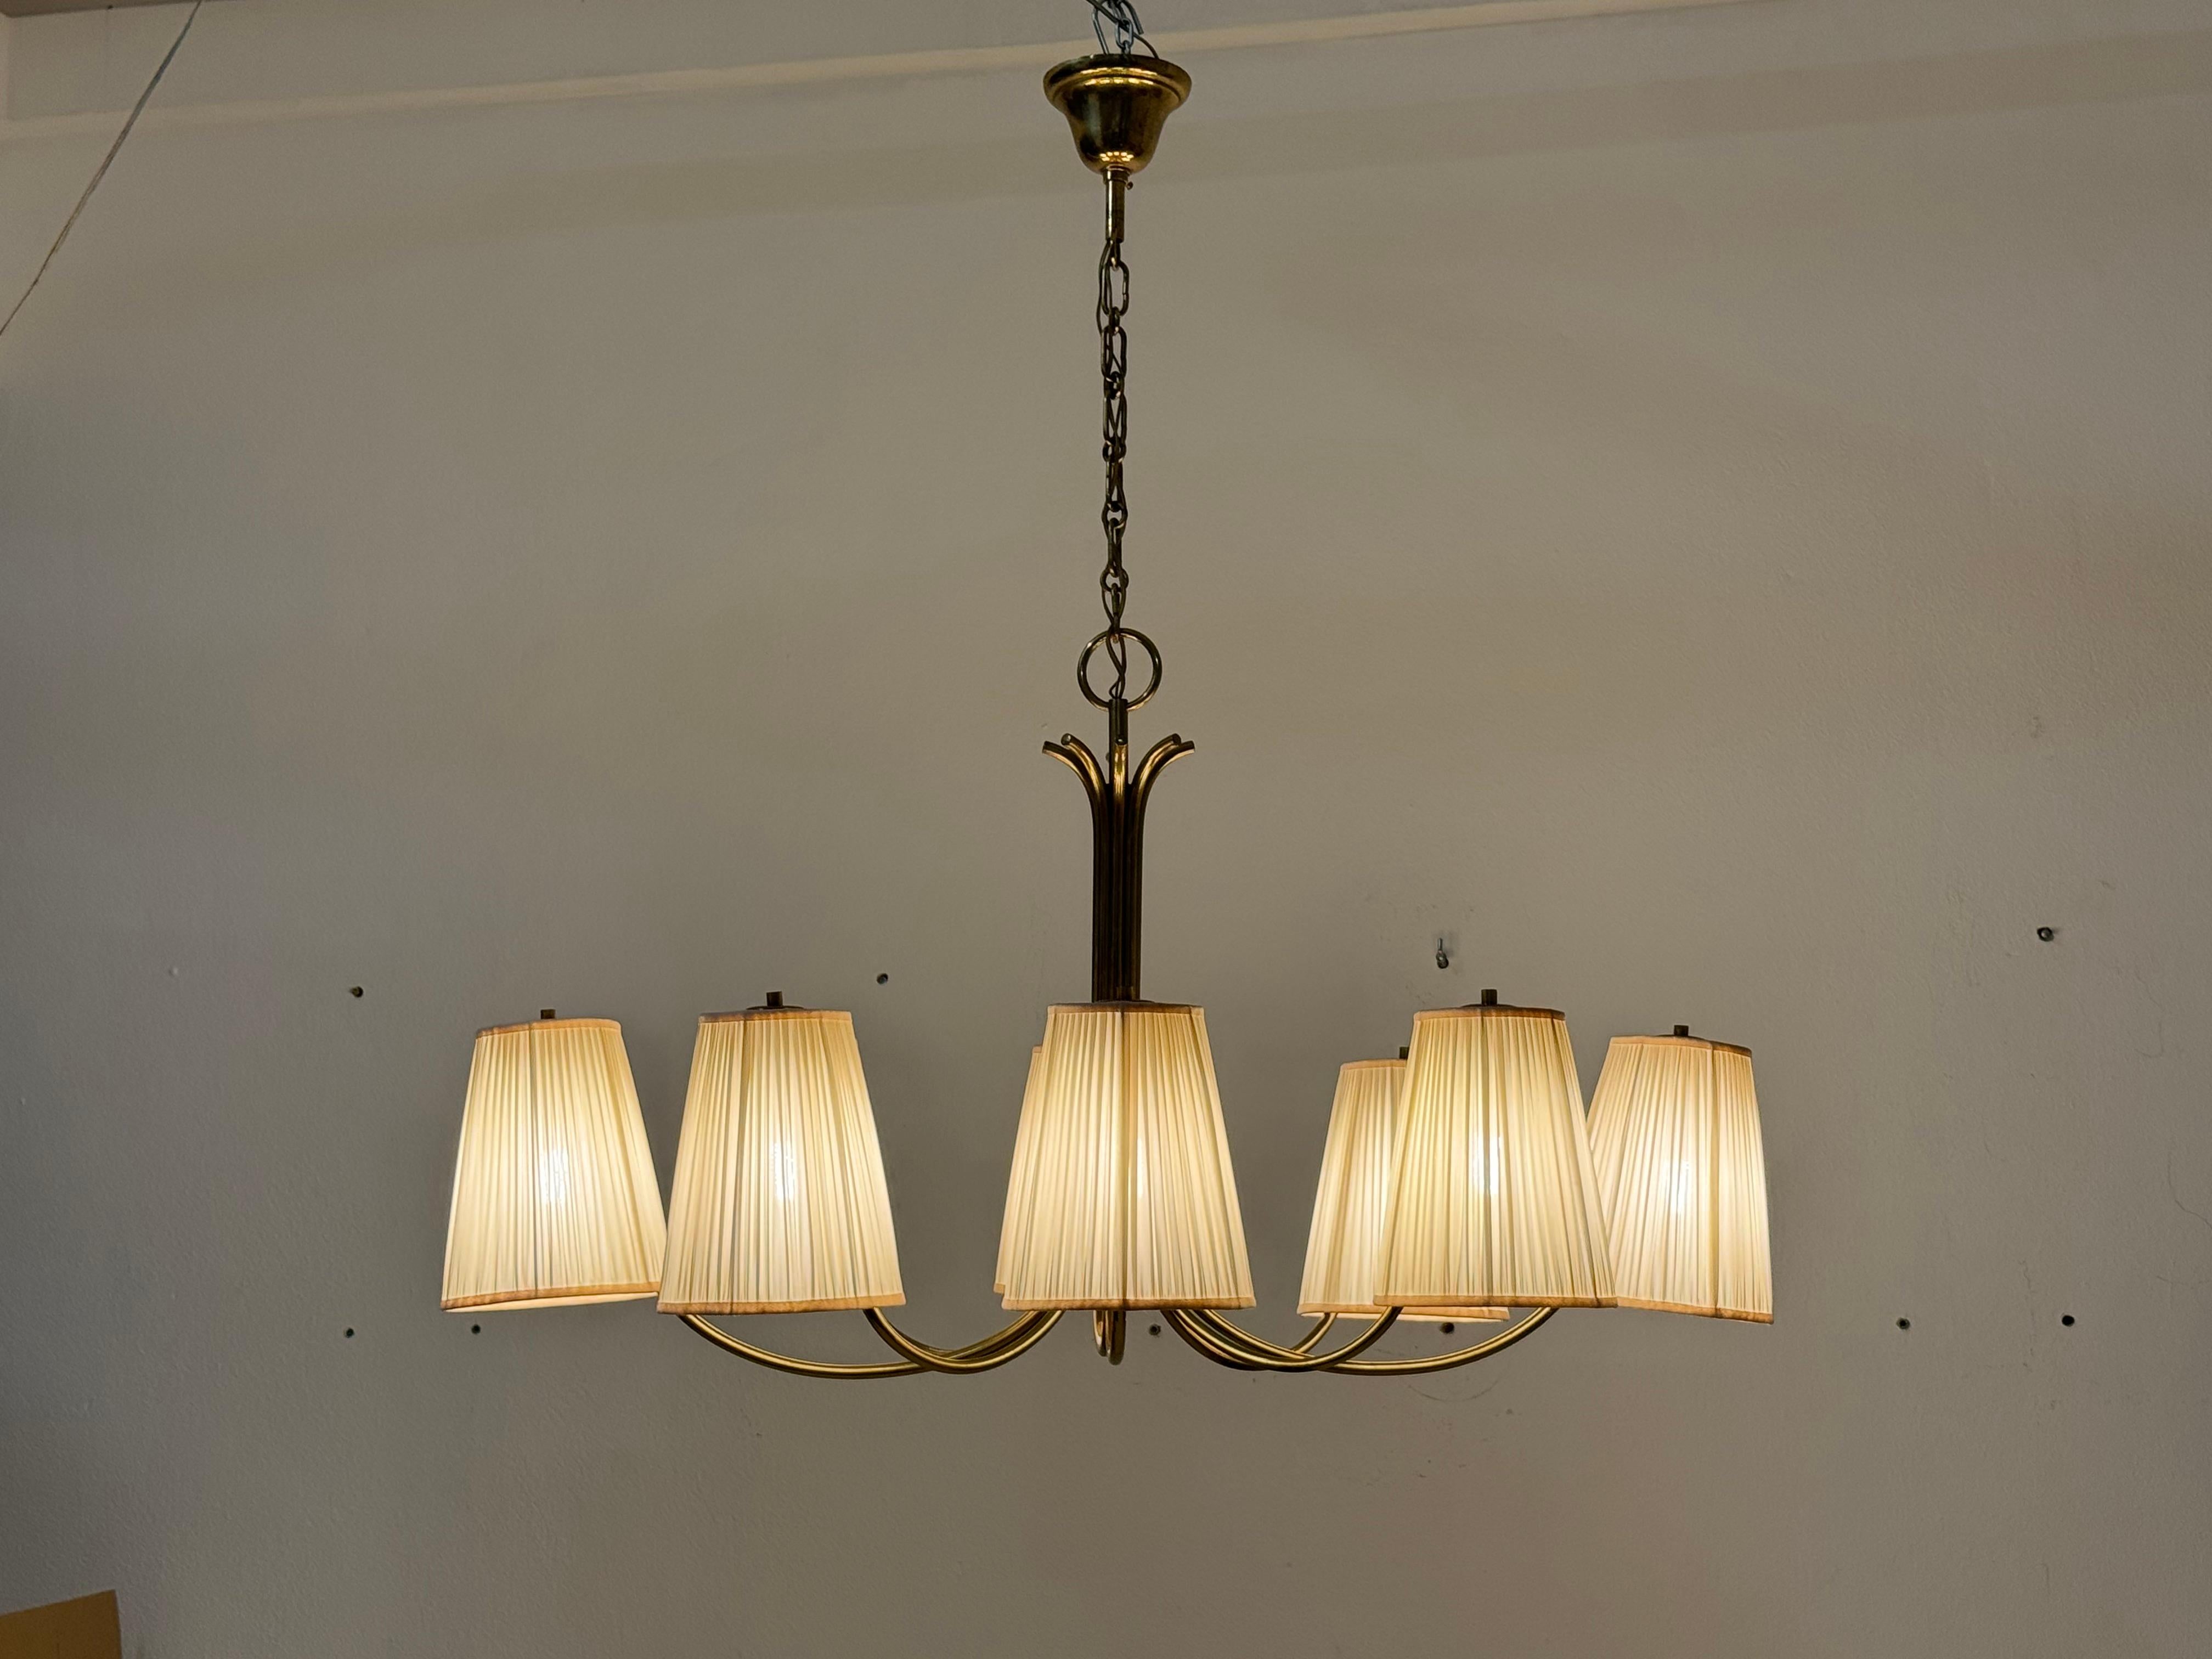 Rare Eight Arms Chandelier by Josef Frank for Kalmar In Good Condition For Sale In Vienna, AT